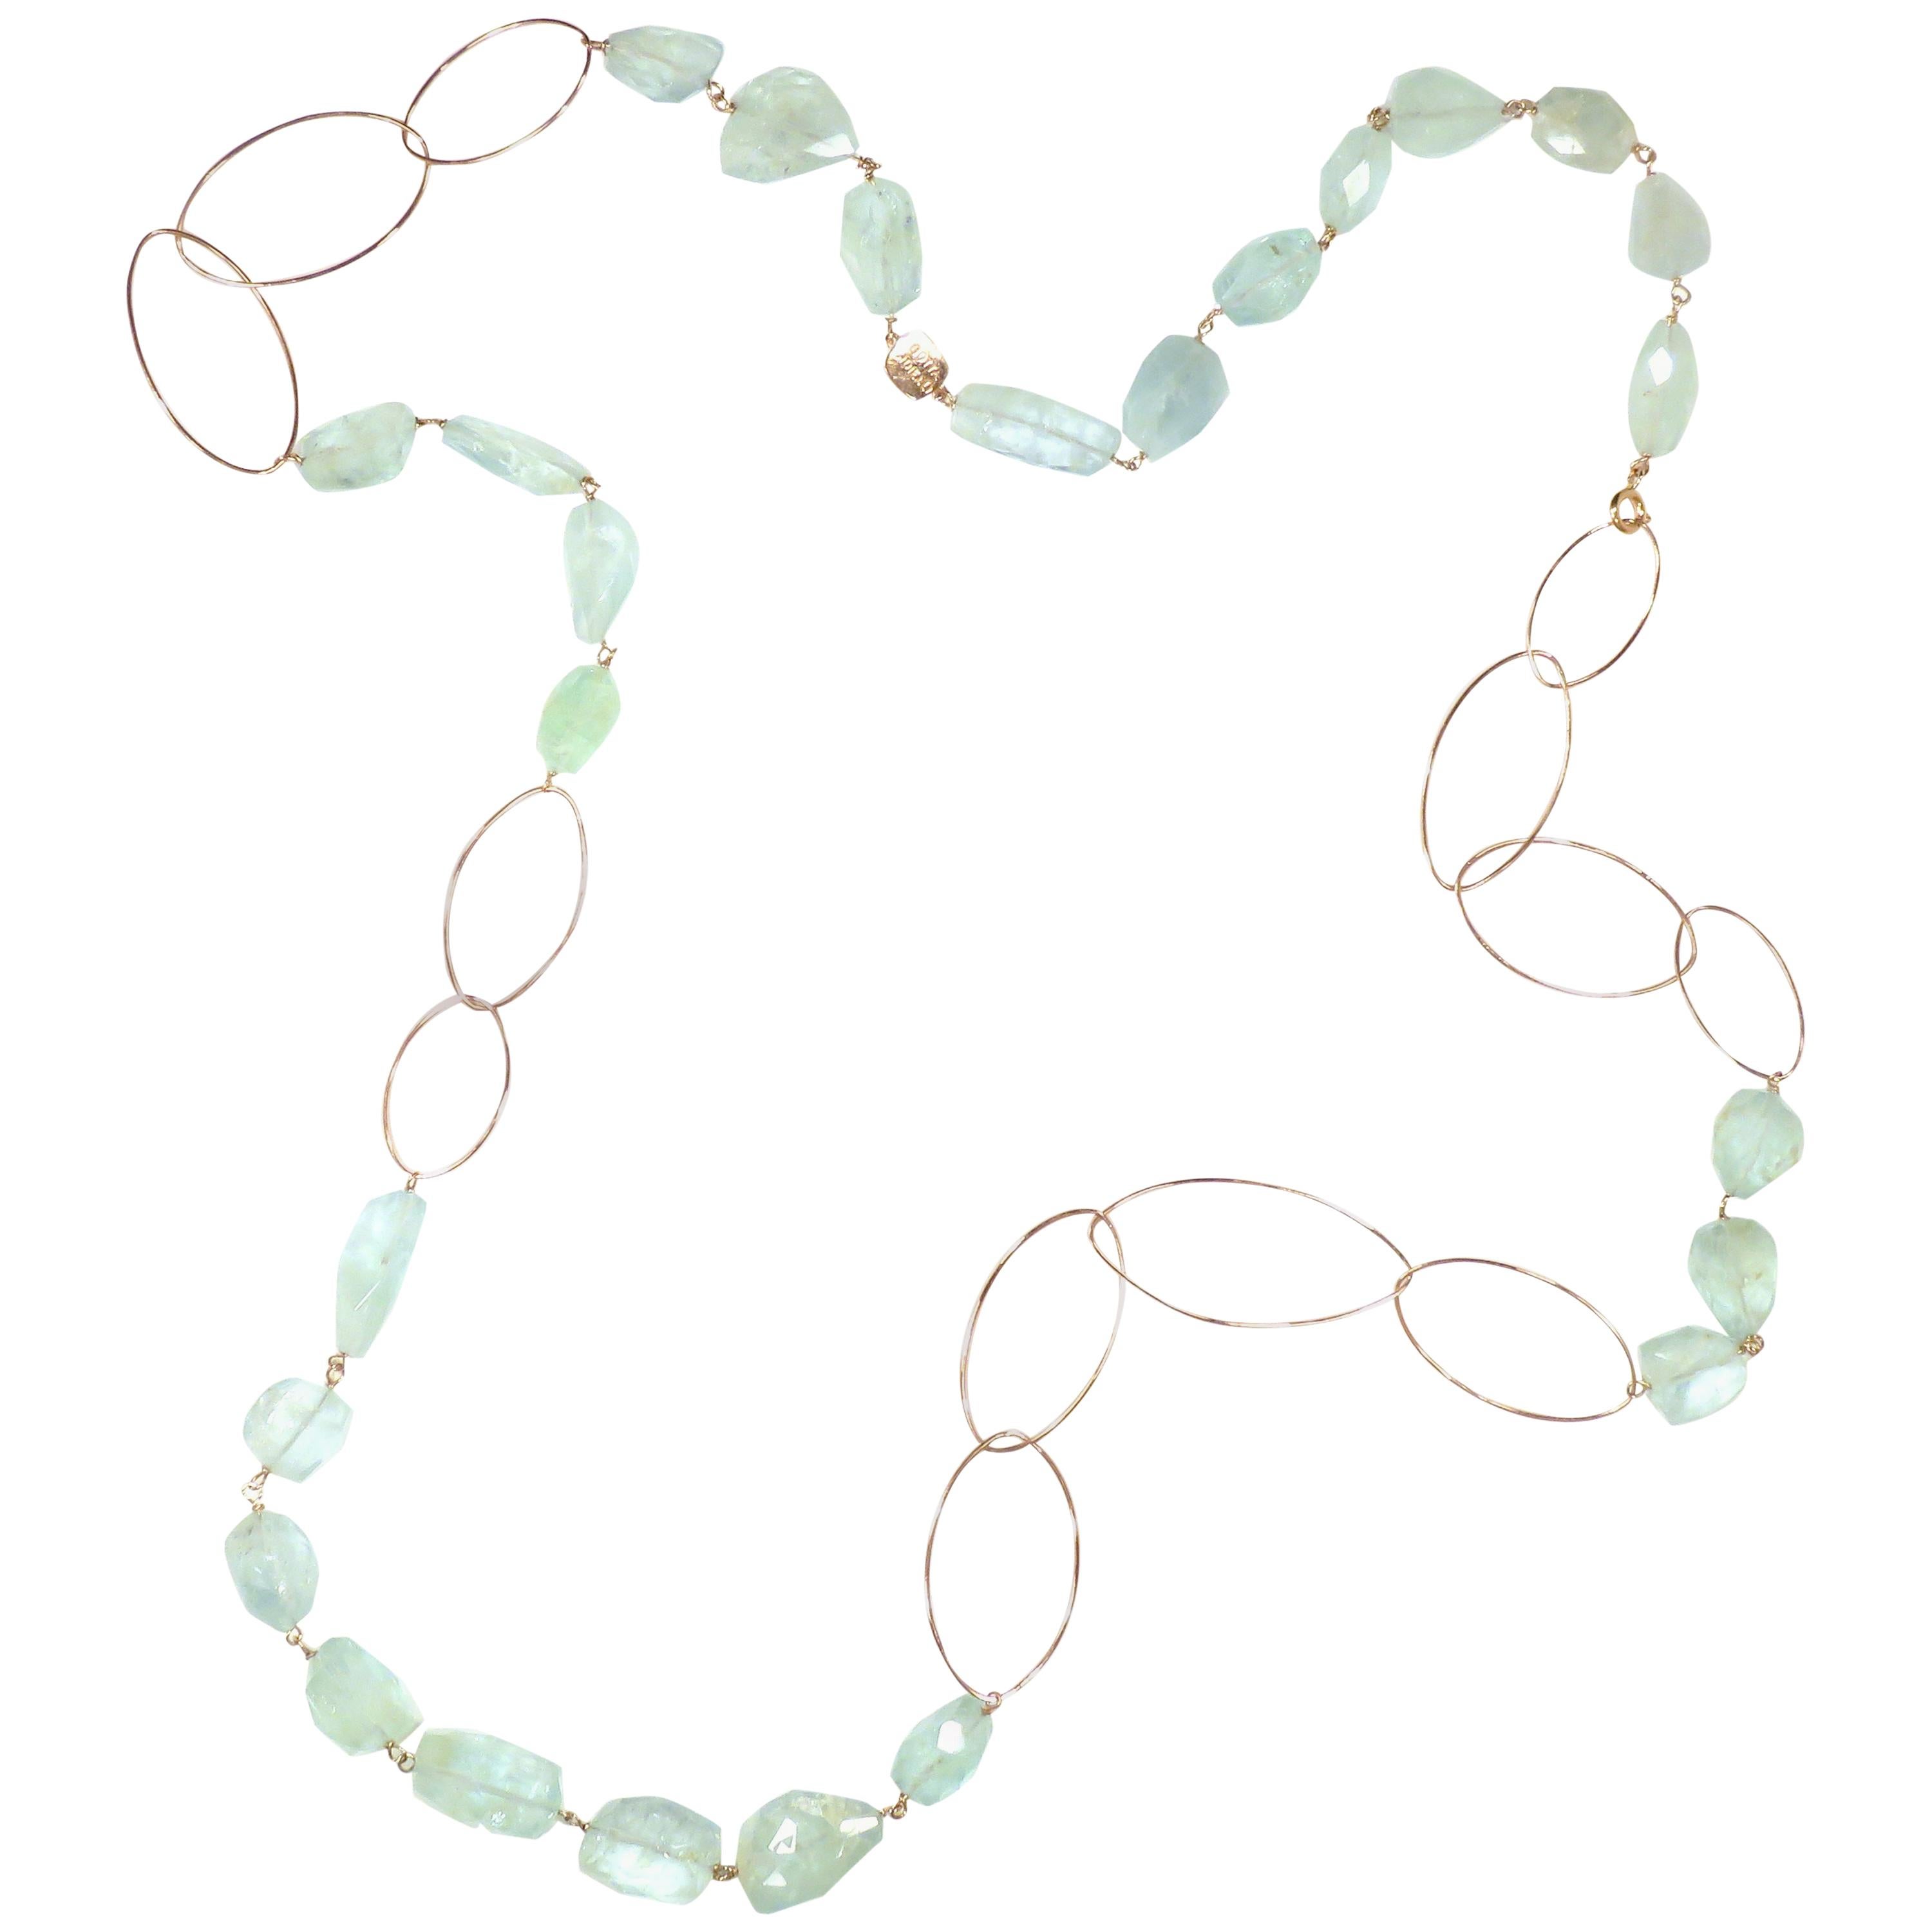 Aquamarine 9 Karat Rose Gold Necklace Handcrafted in Italy by Botta Gioielli